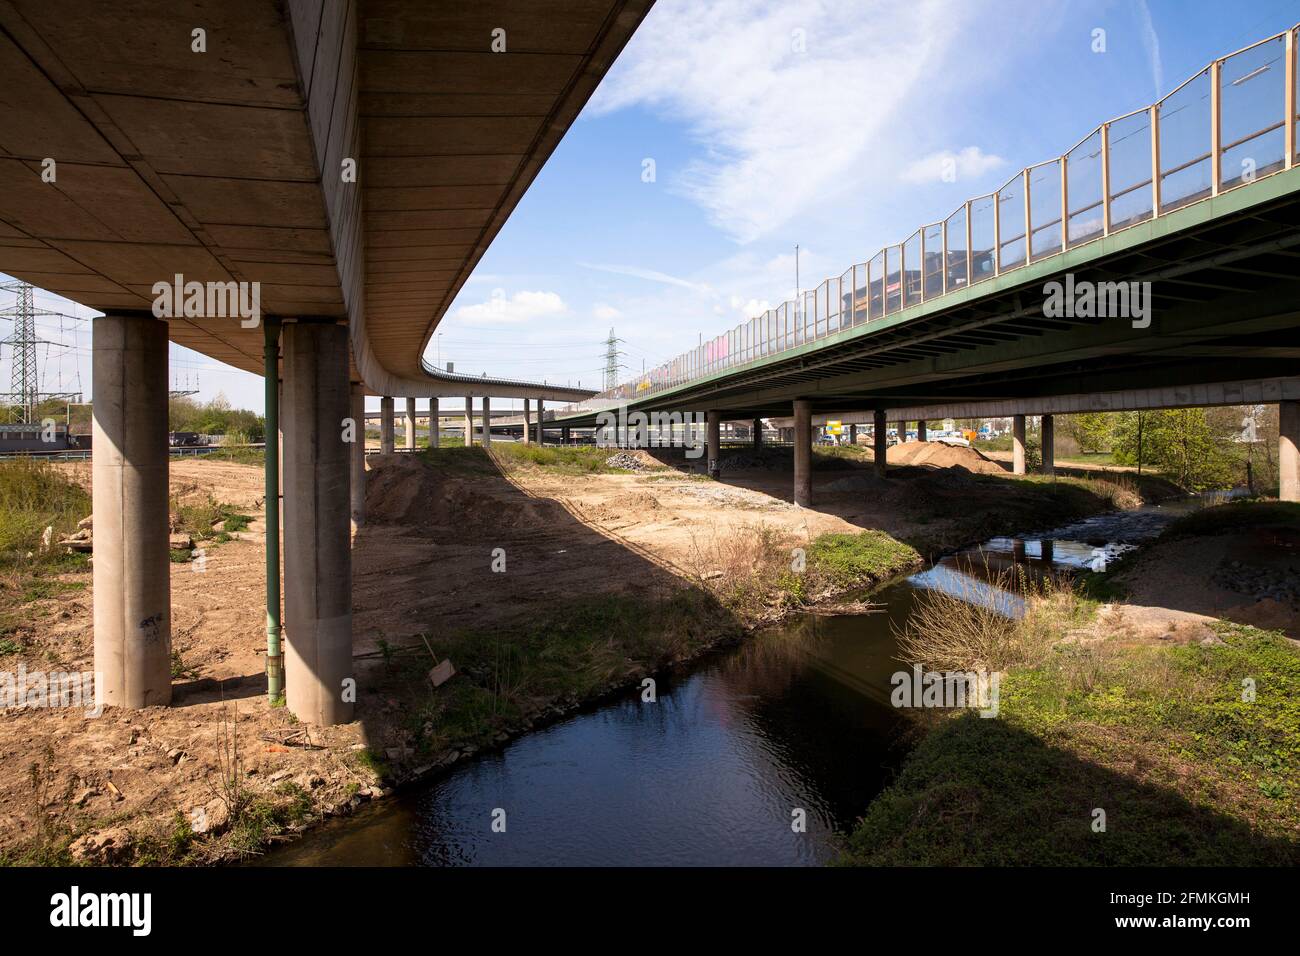 bridges of the access roads to the A1 and A59 freeways cross the river Dhuenn at the Neuland Park in Leverkusen, North Rhine-Westphalia, Germany.  Bru Stock Photo